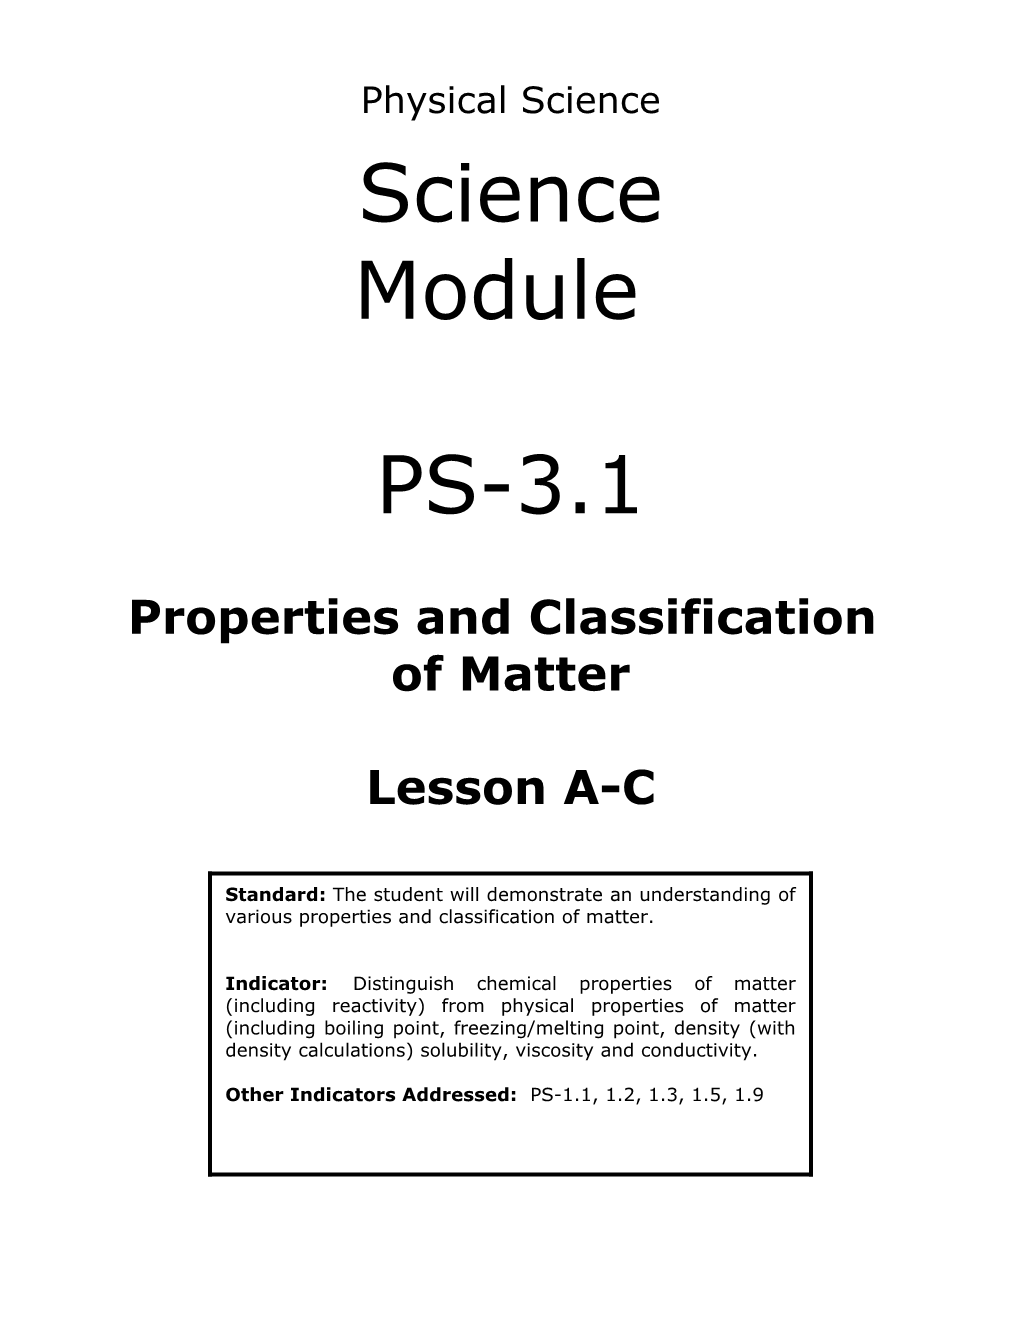 Properties and Classification